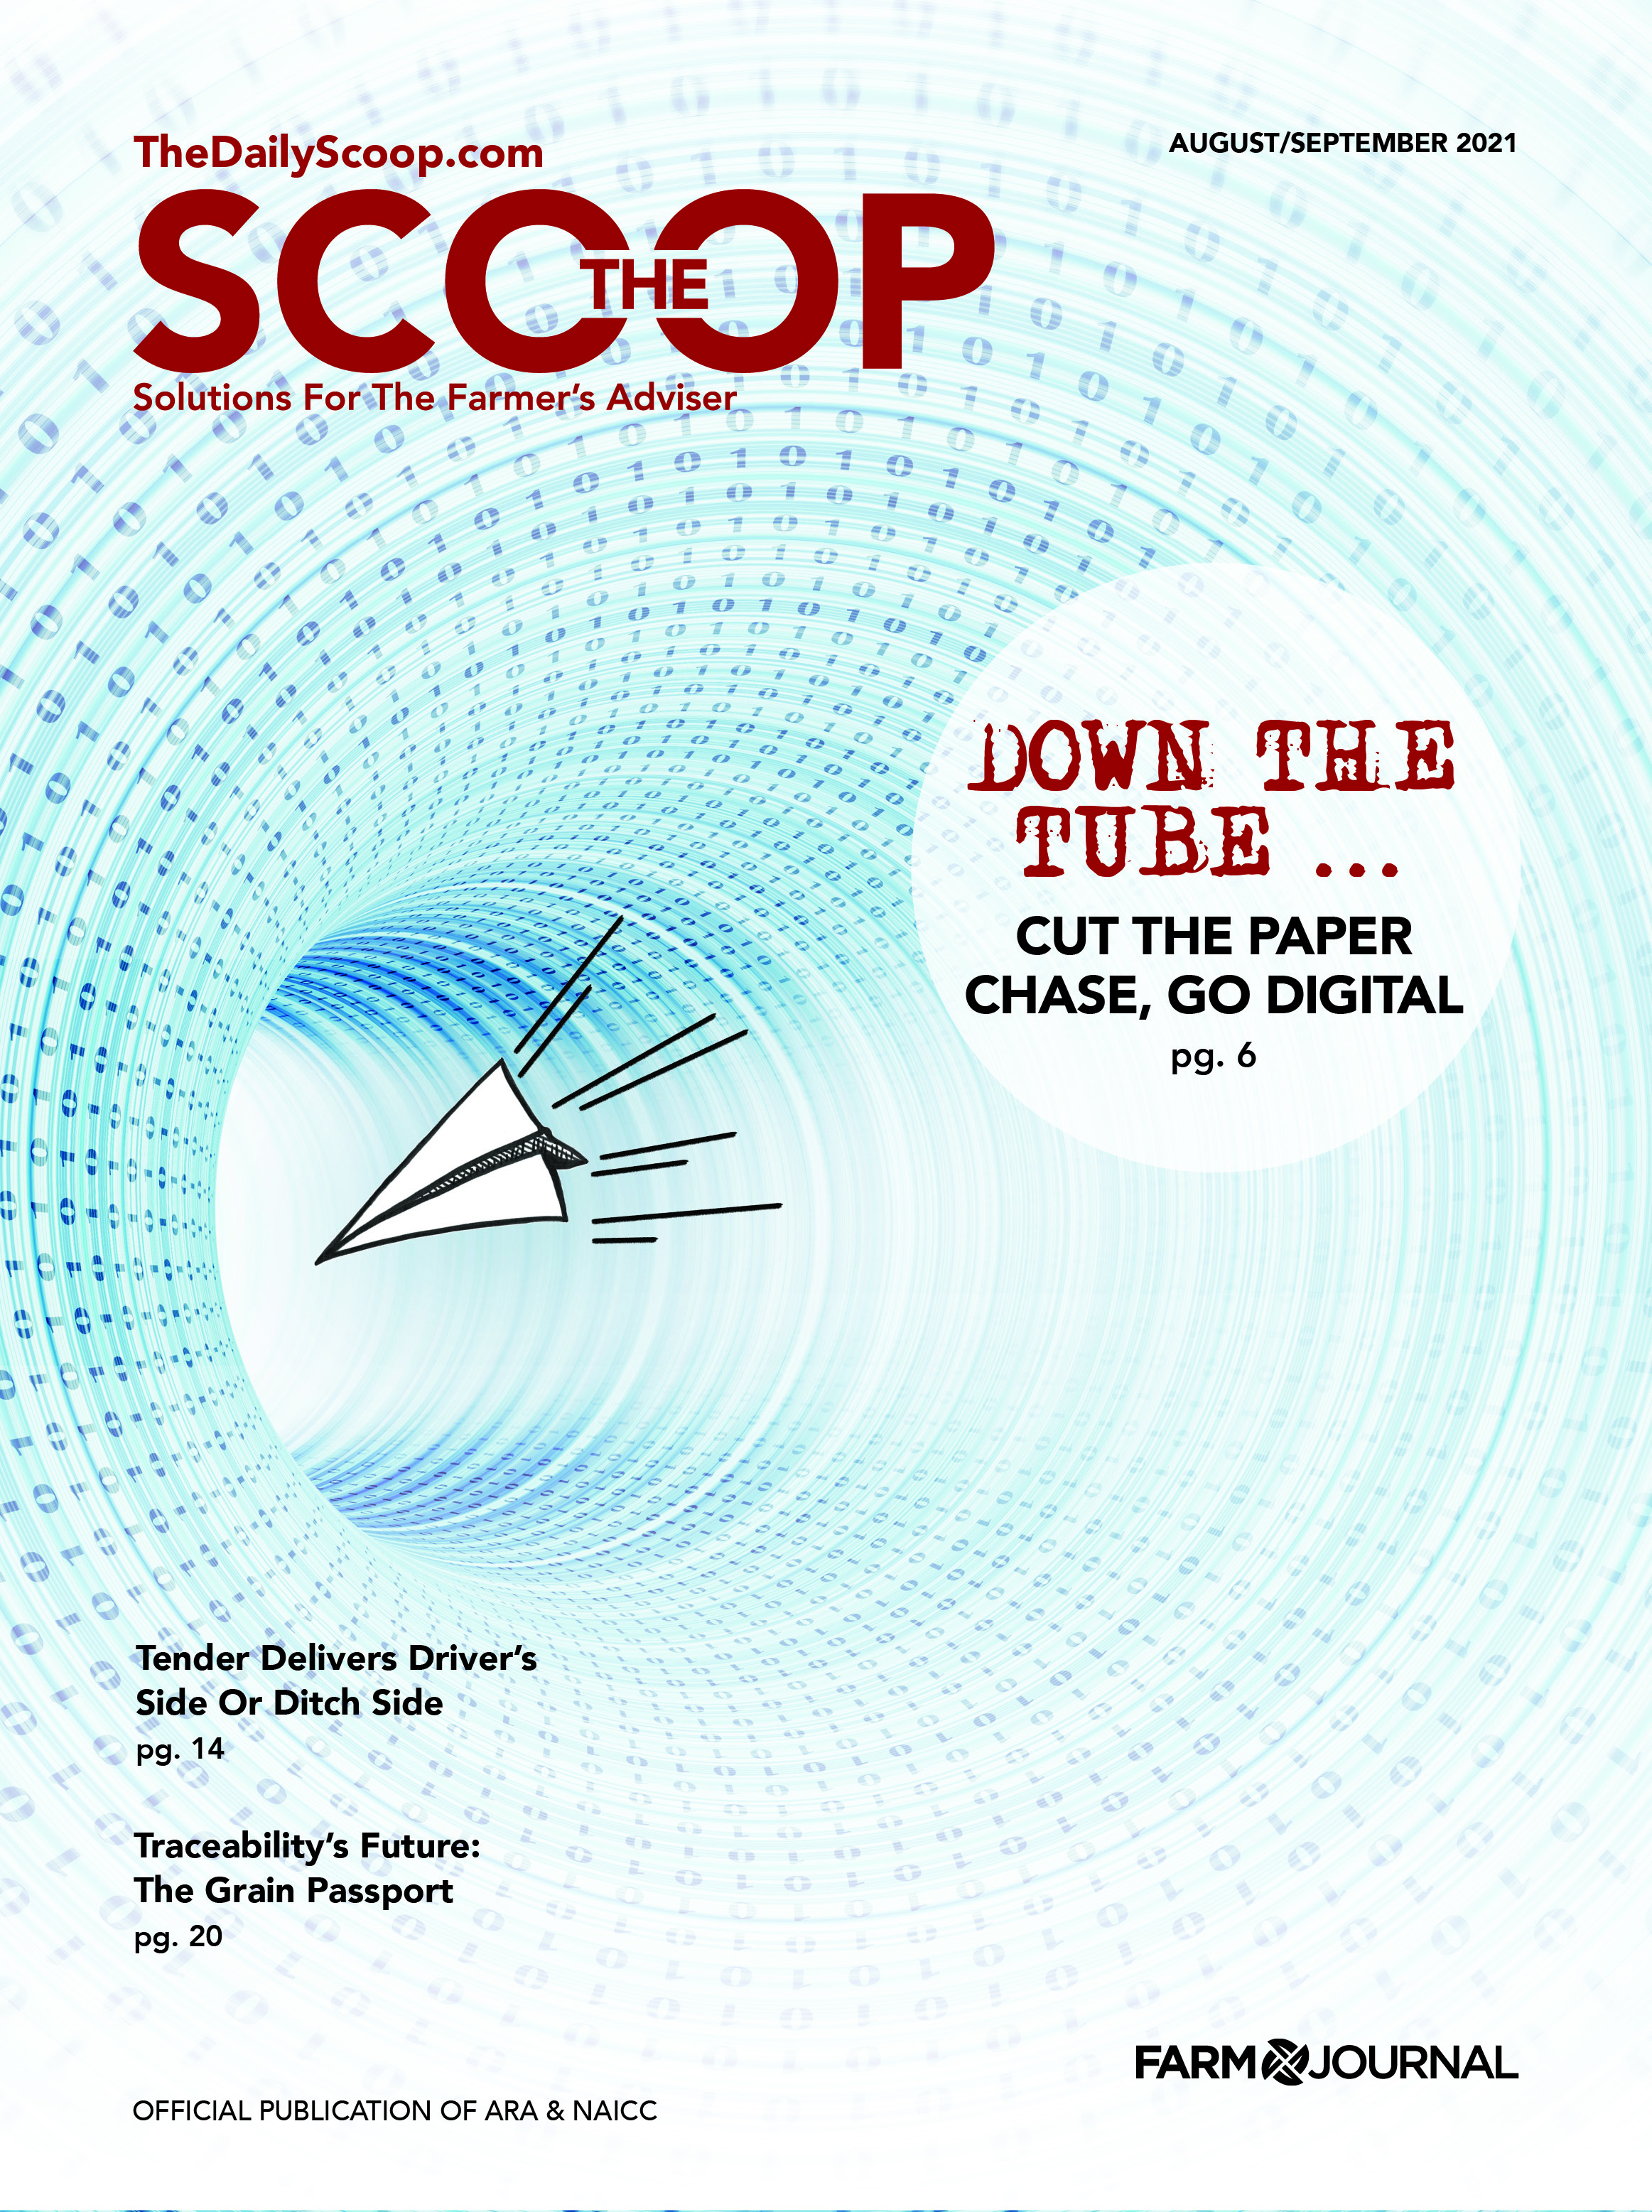  The Scoop cover August-September 2021 